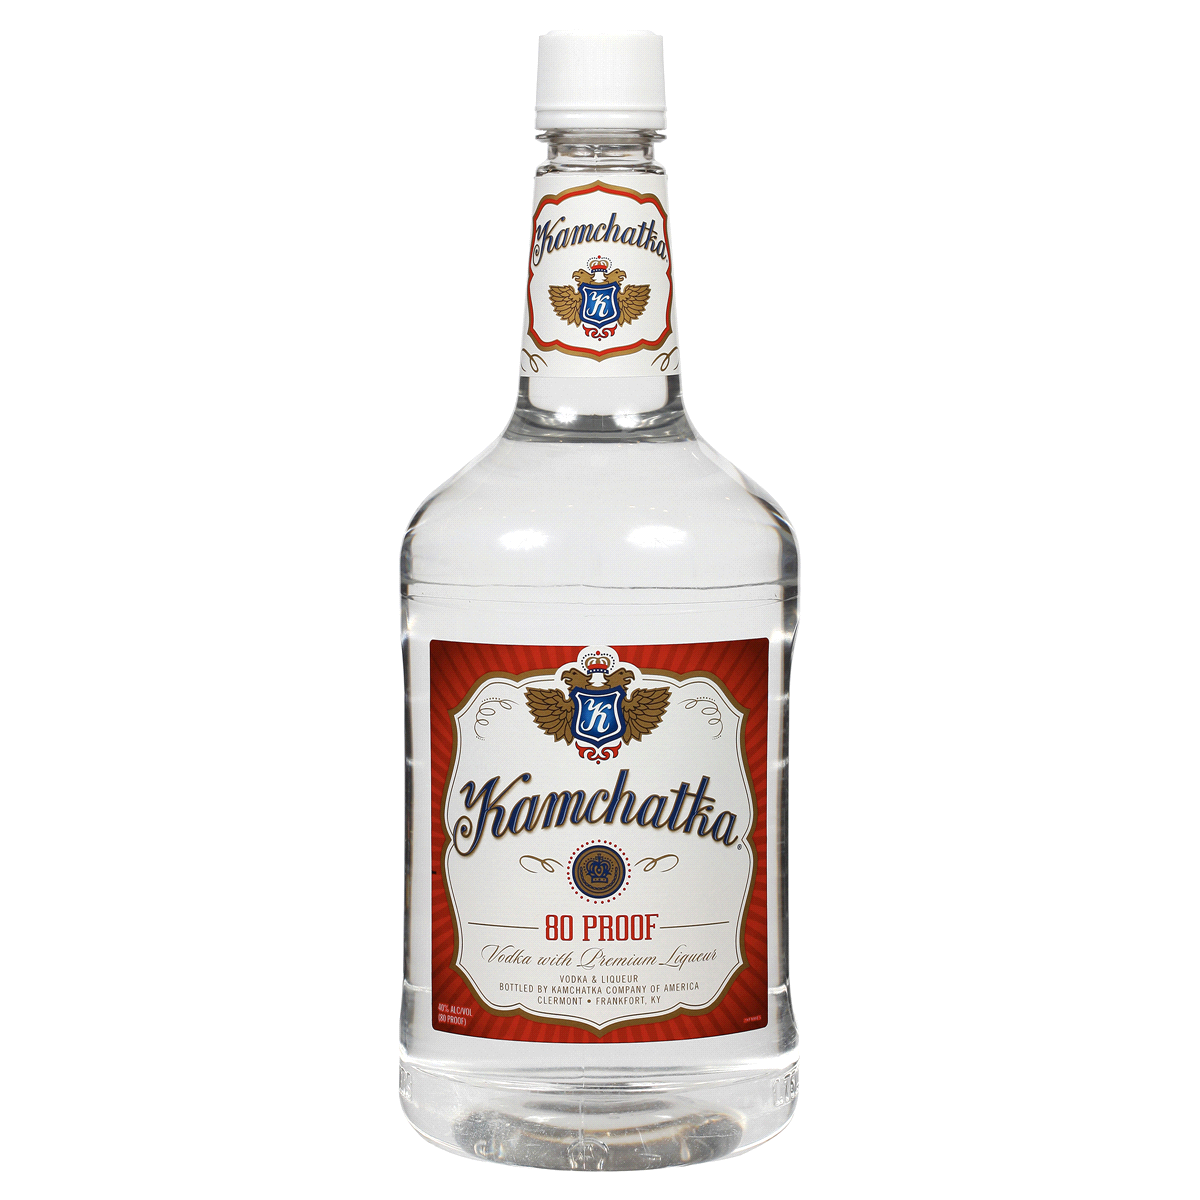 images/wine/SPIRITAS and OTHERS/Kamchatka Vodka 1.75L.png